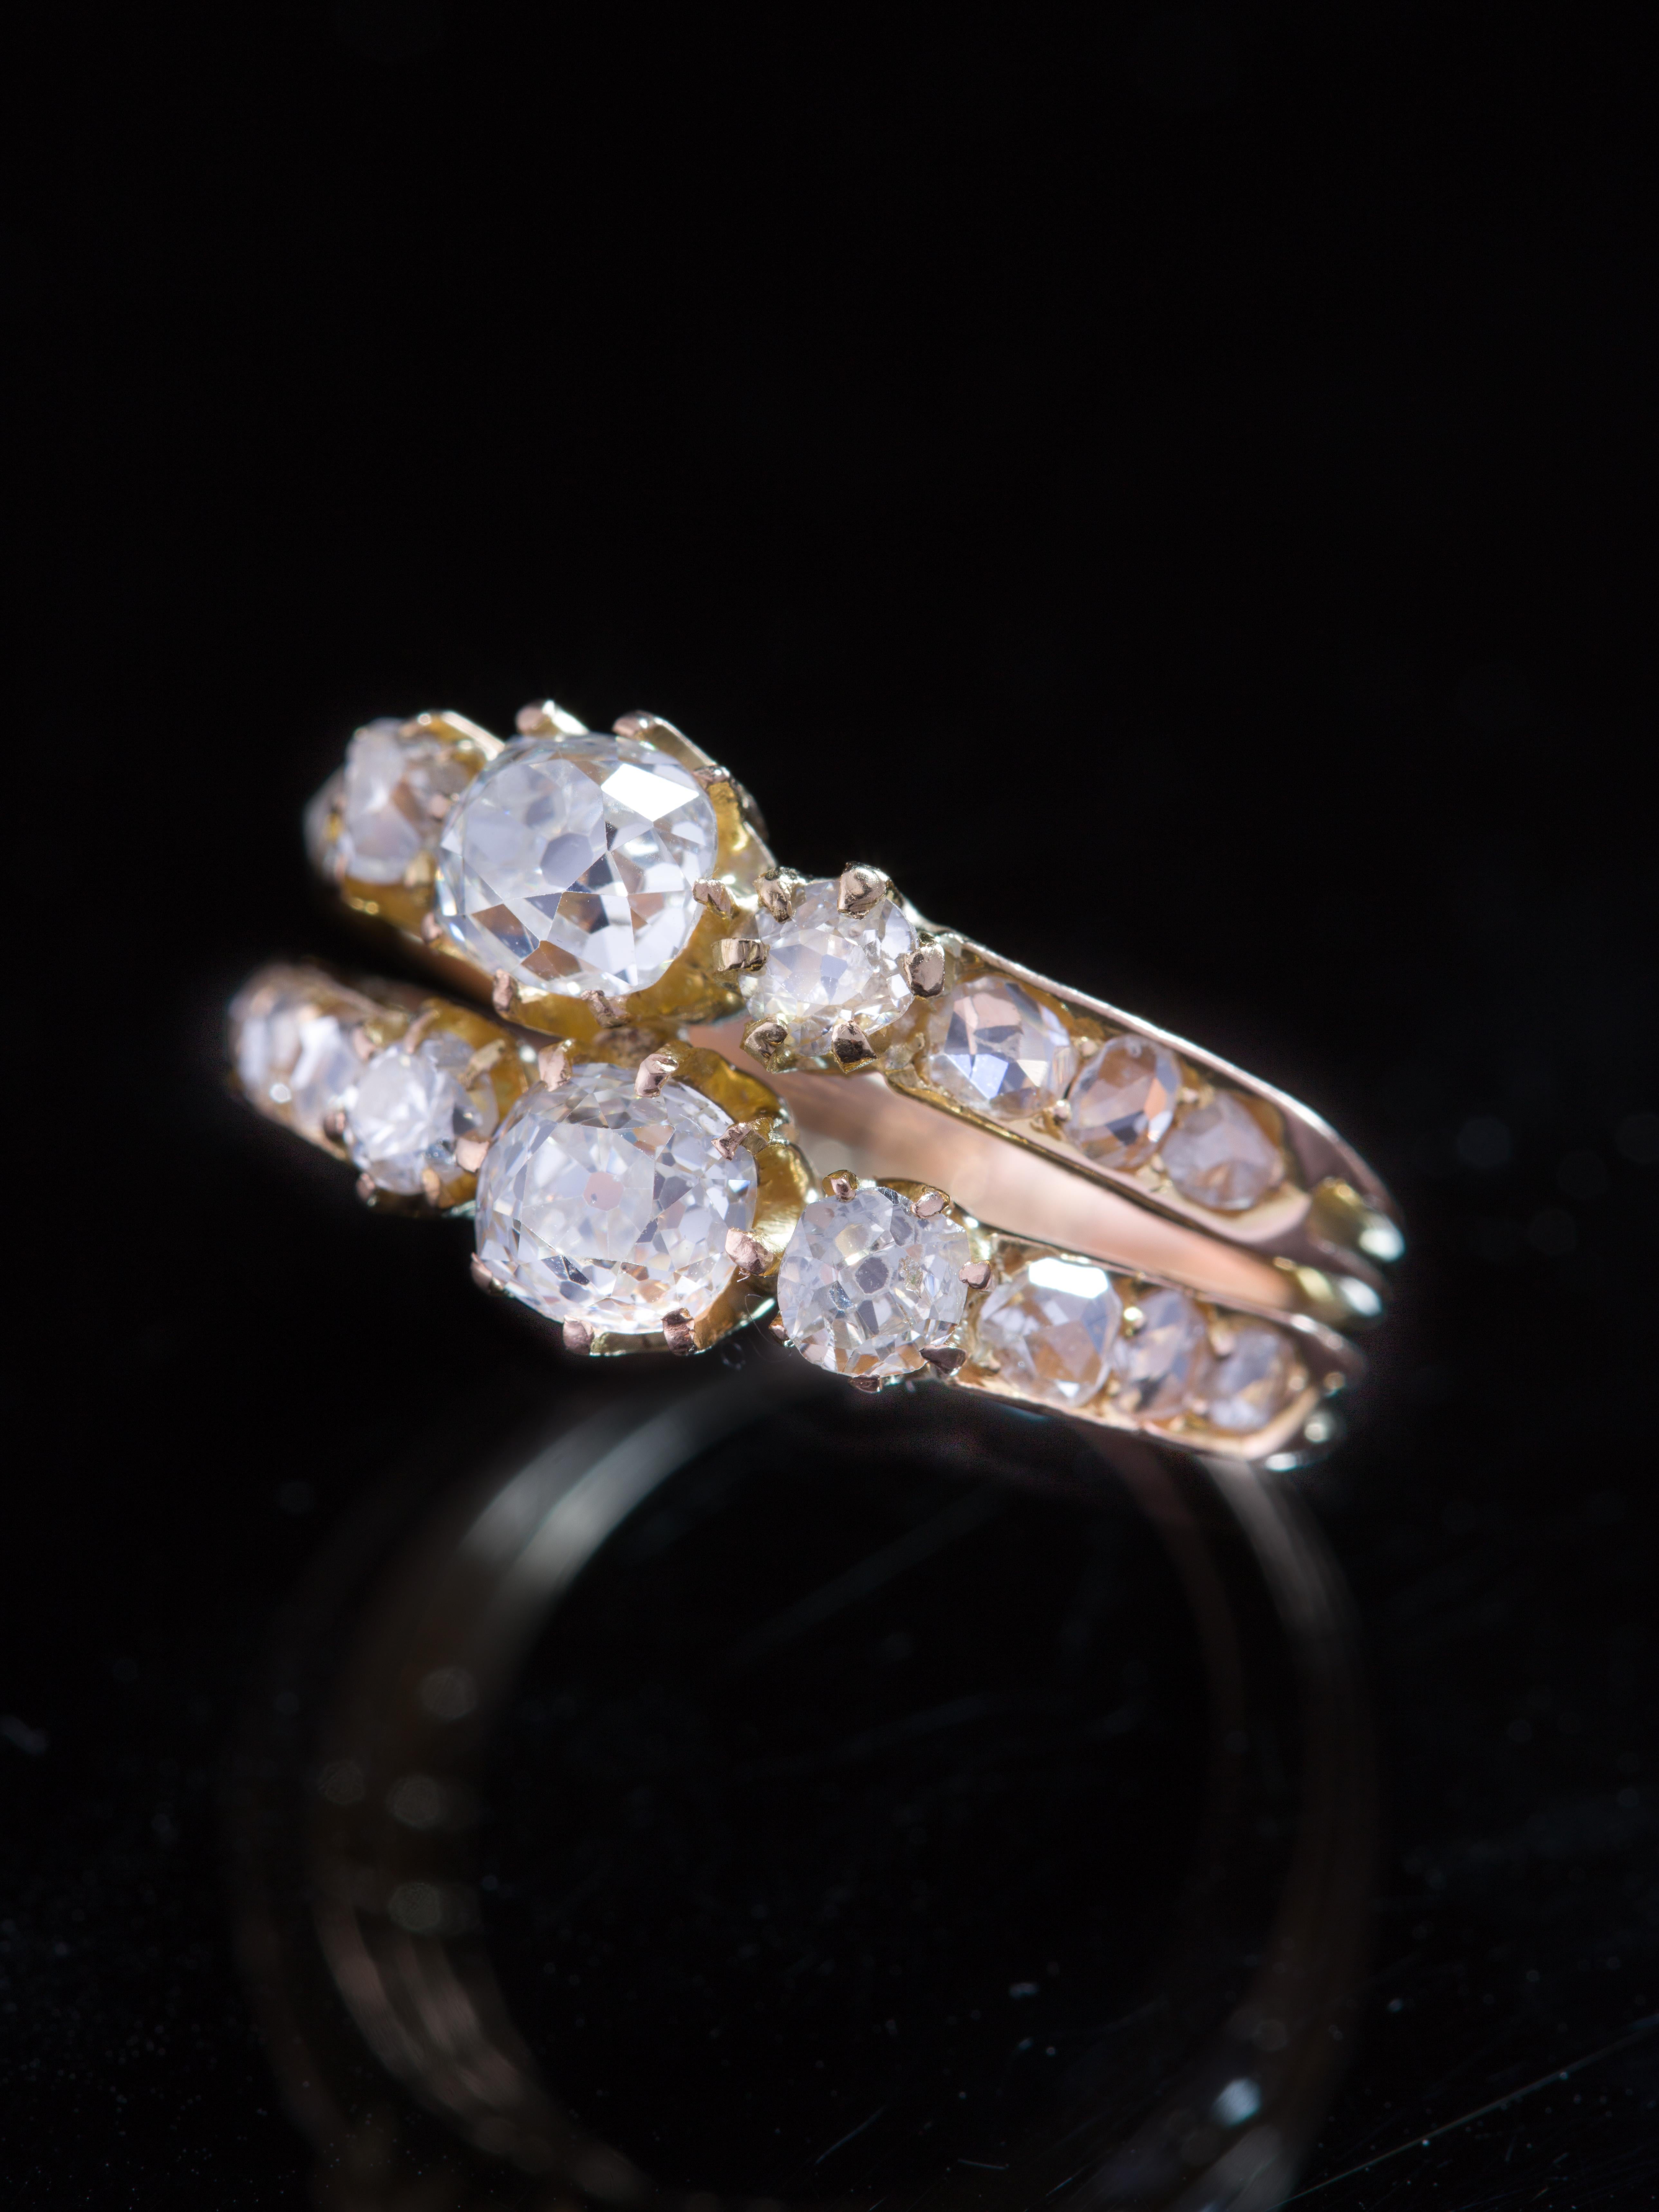 Sentimental in nature, symbolizing the melding of two into one, or two souls lying along each other for eternity is this romantic diamond ring from Victorian era.  
Sensual and complex in its vision, resonating with sparks of light this Victorian